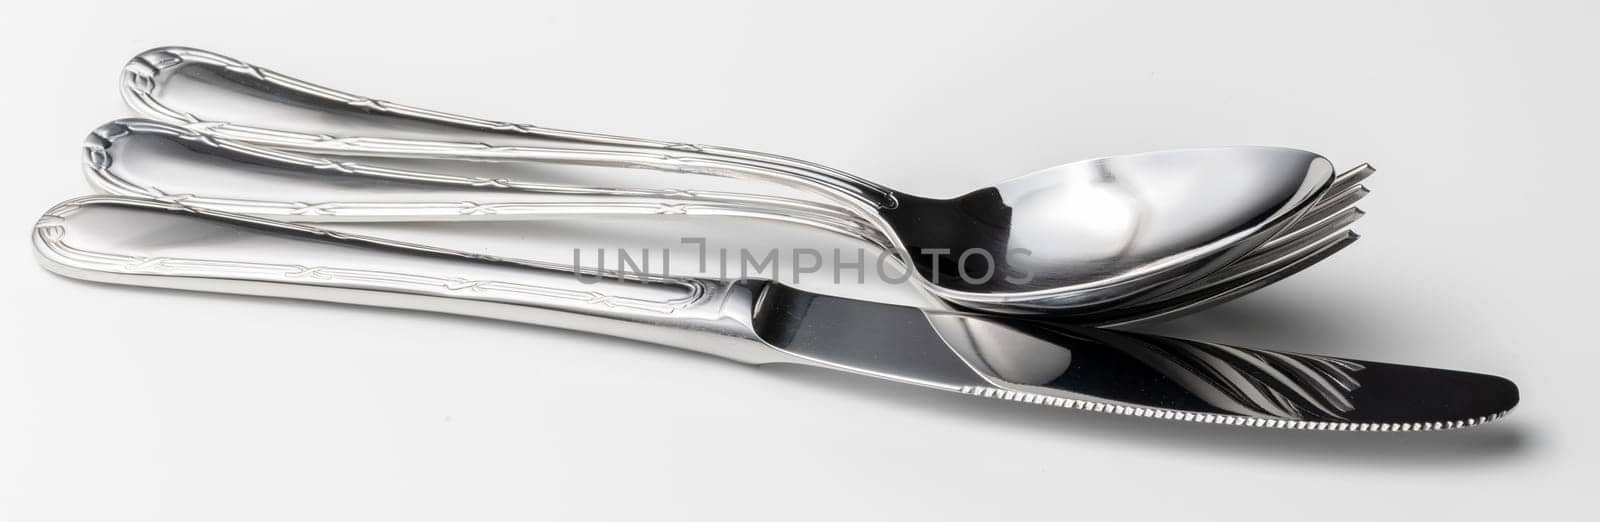 Spoon, fork and knife on a white background by Fabrikasimf